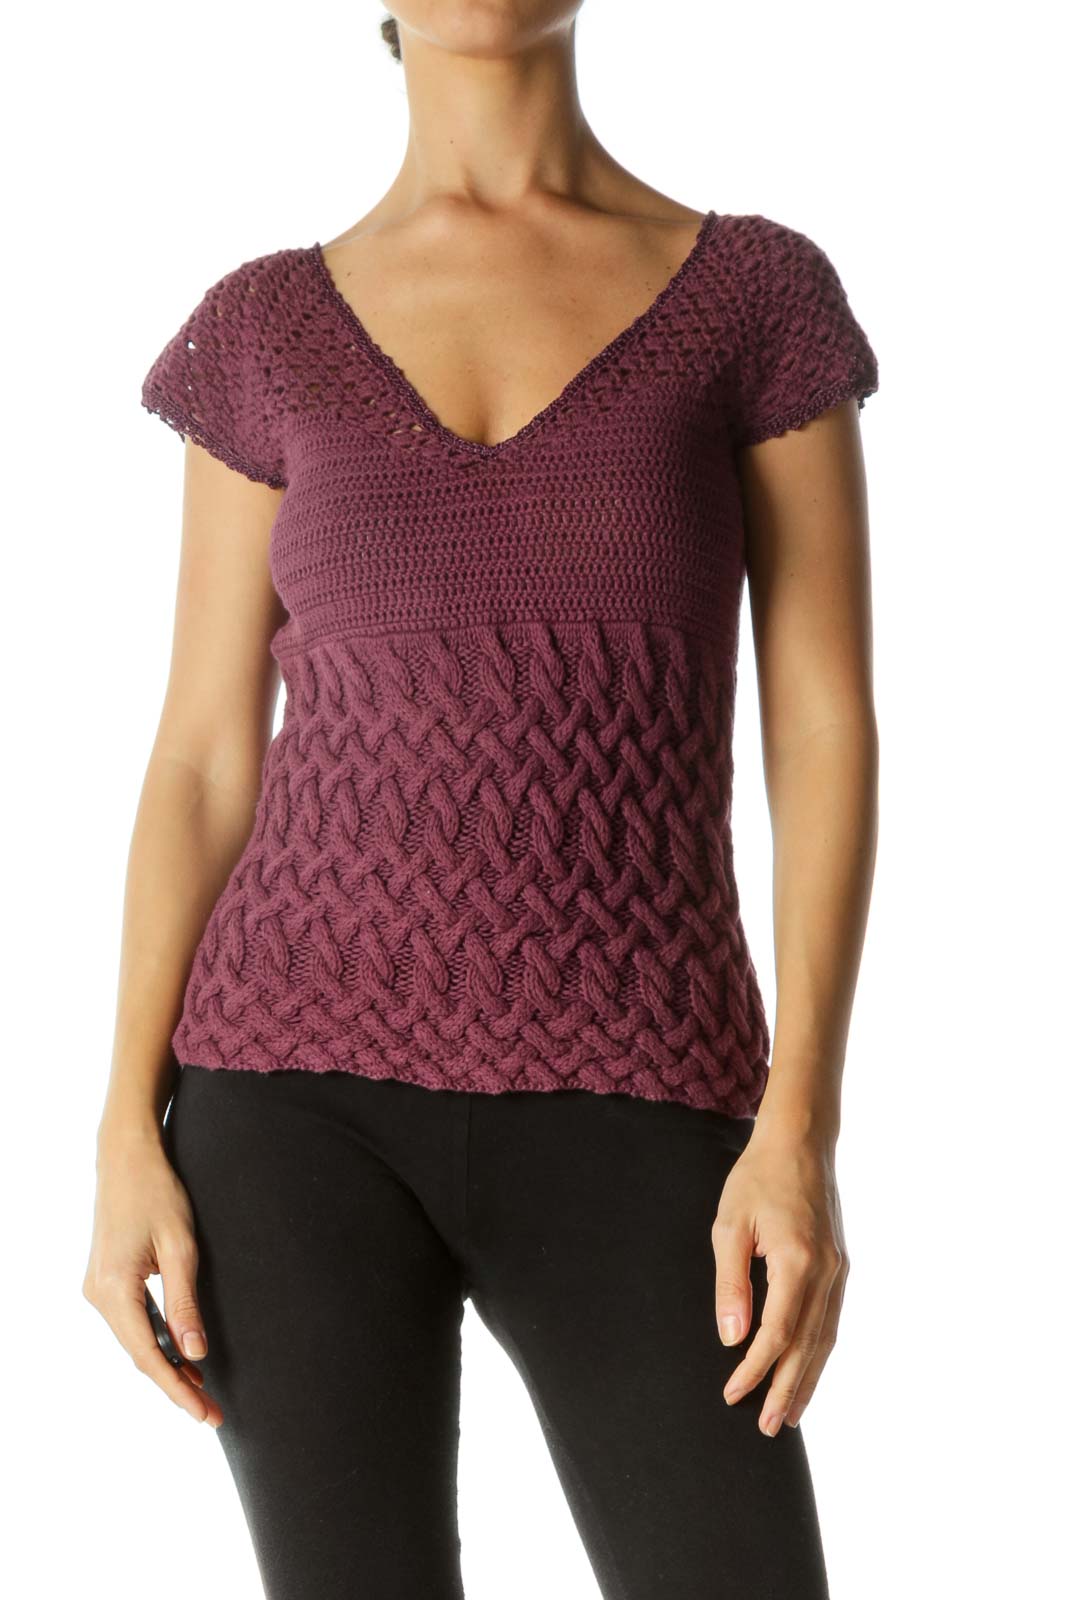 Purple V-Neck Lace Trim Detail Varying Knit Patterns Top Front